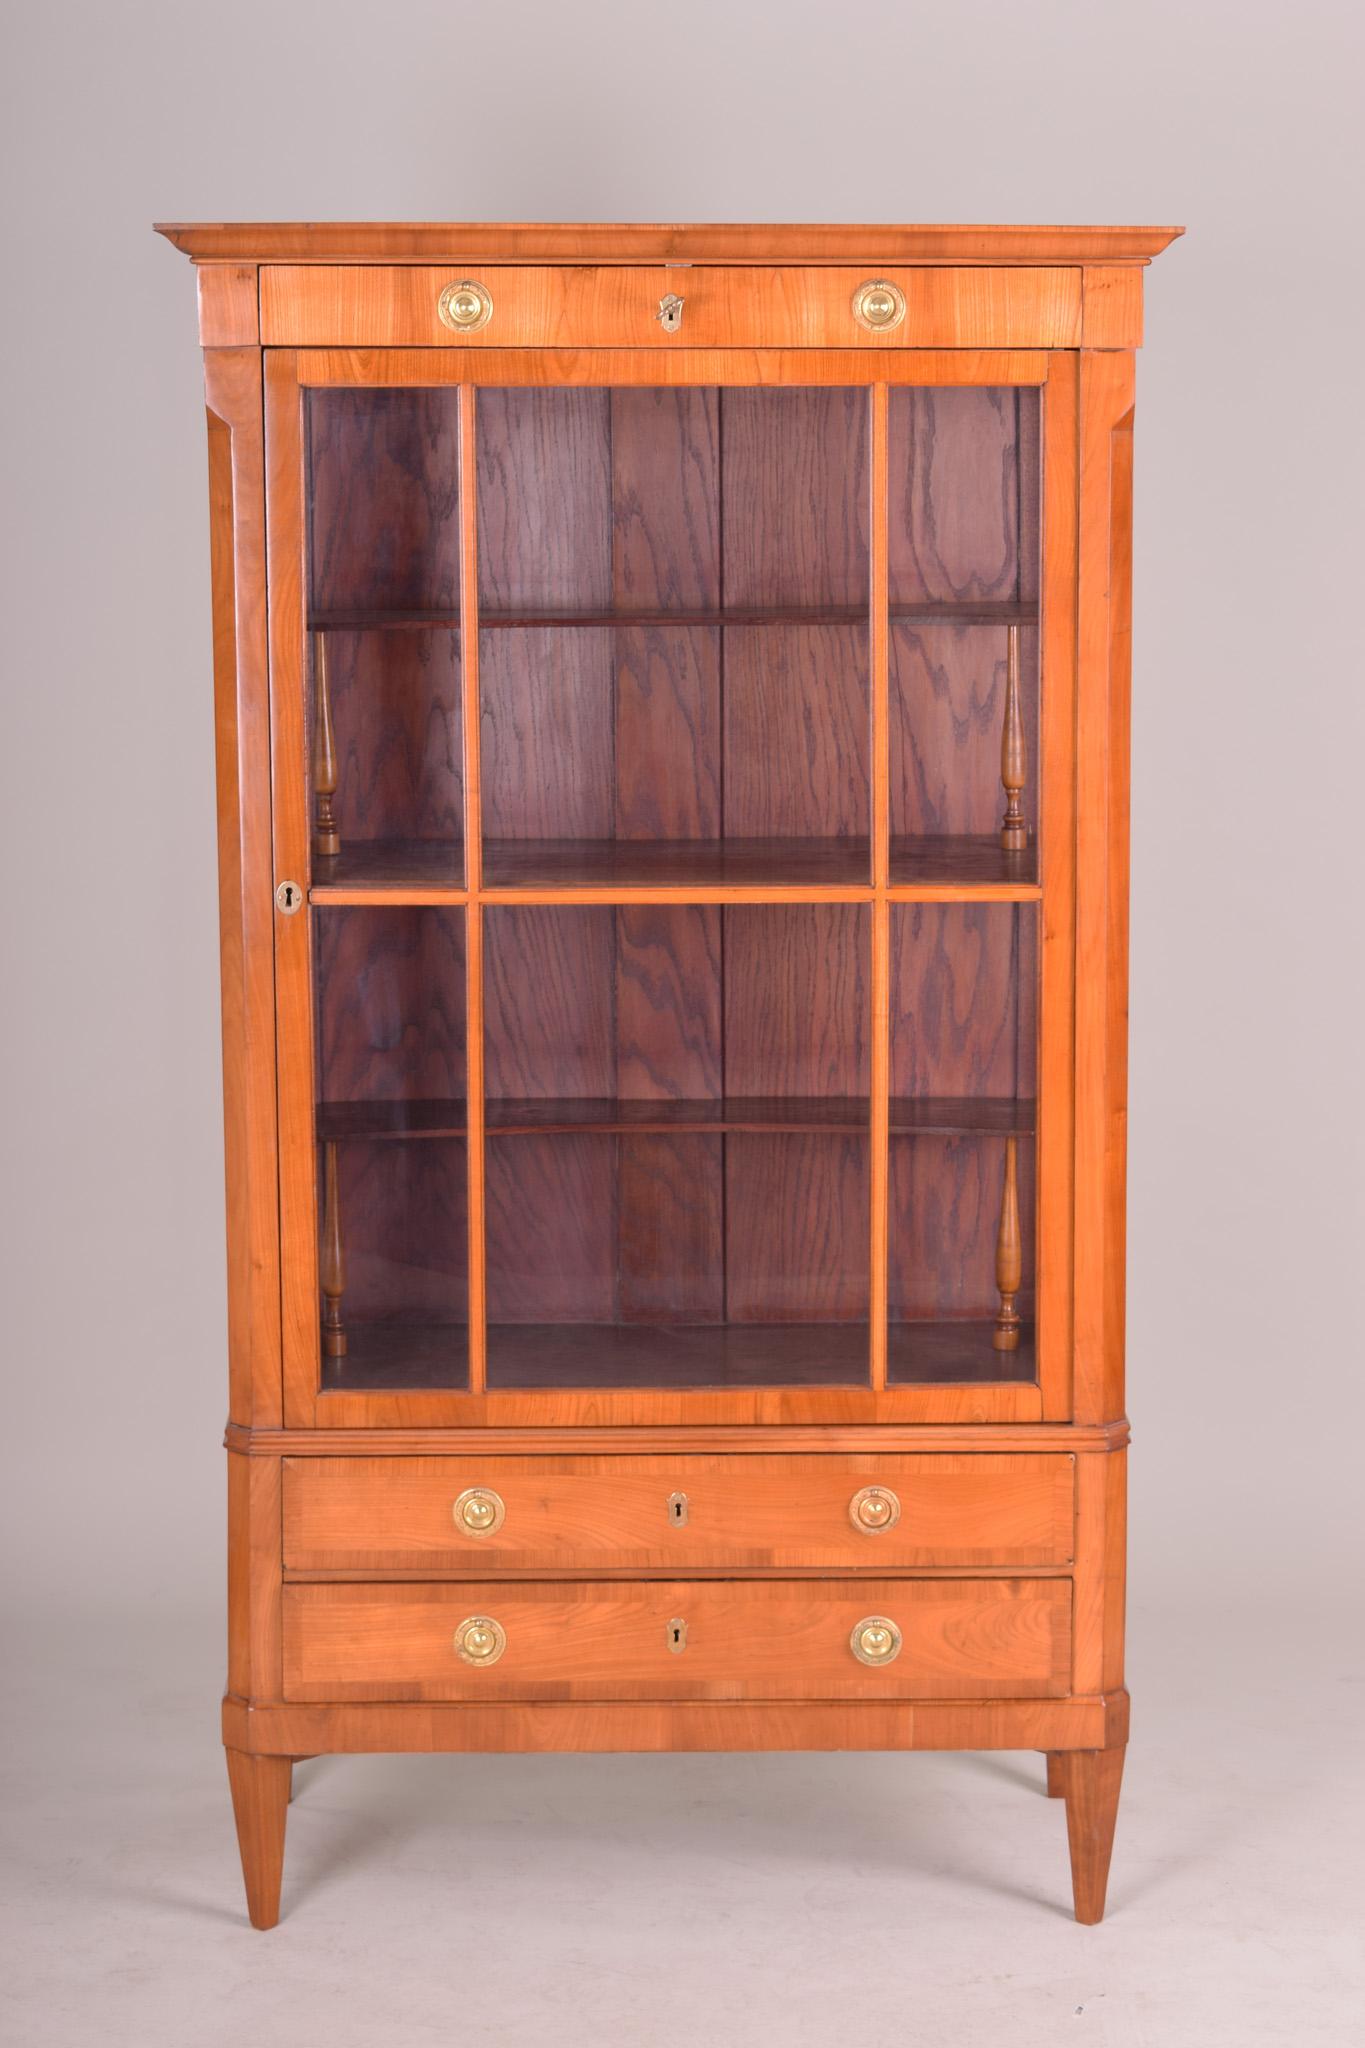 19th century Biedermeier display cabinet from Bohemia.
Completely restored, surface made by shellac polish.